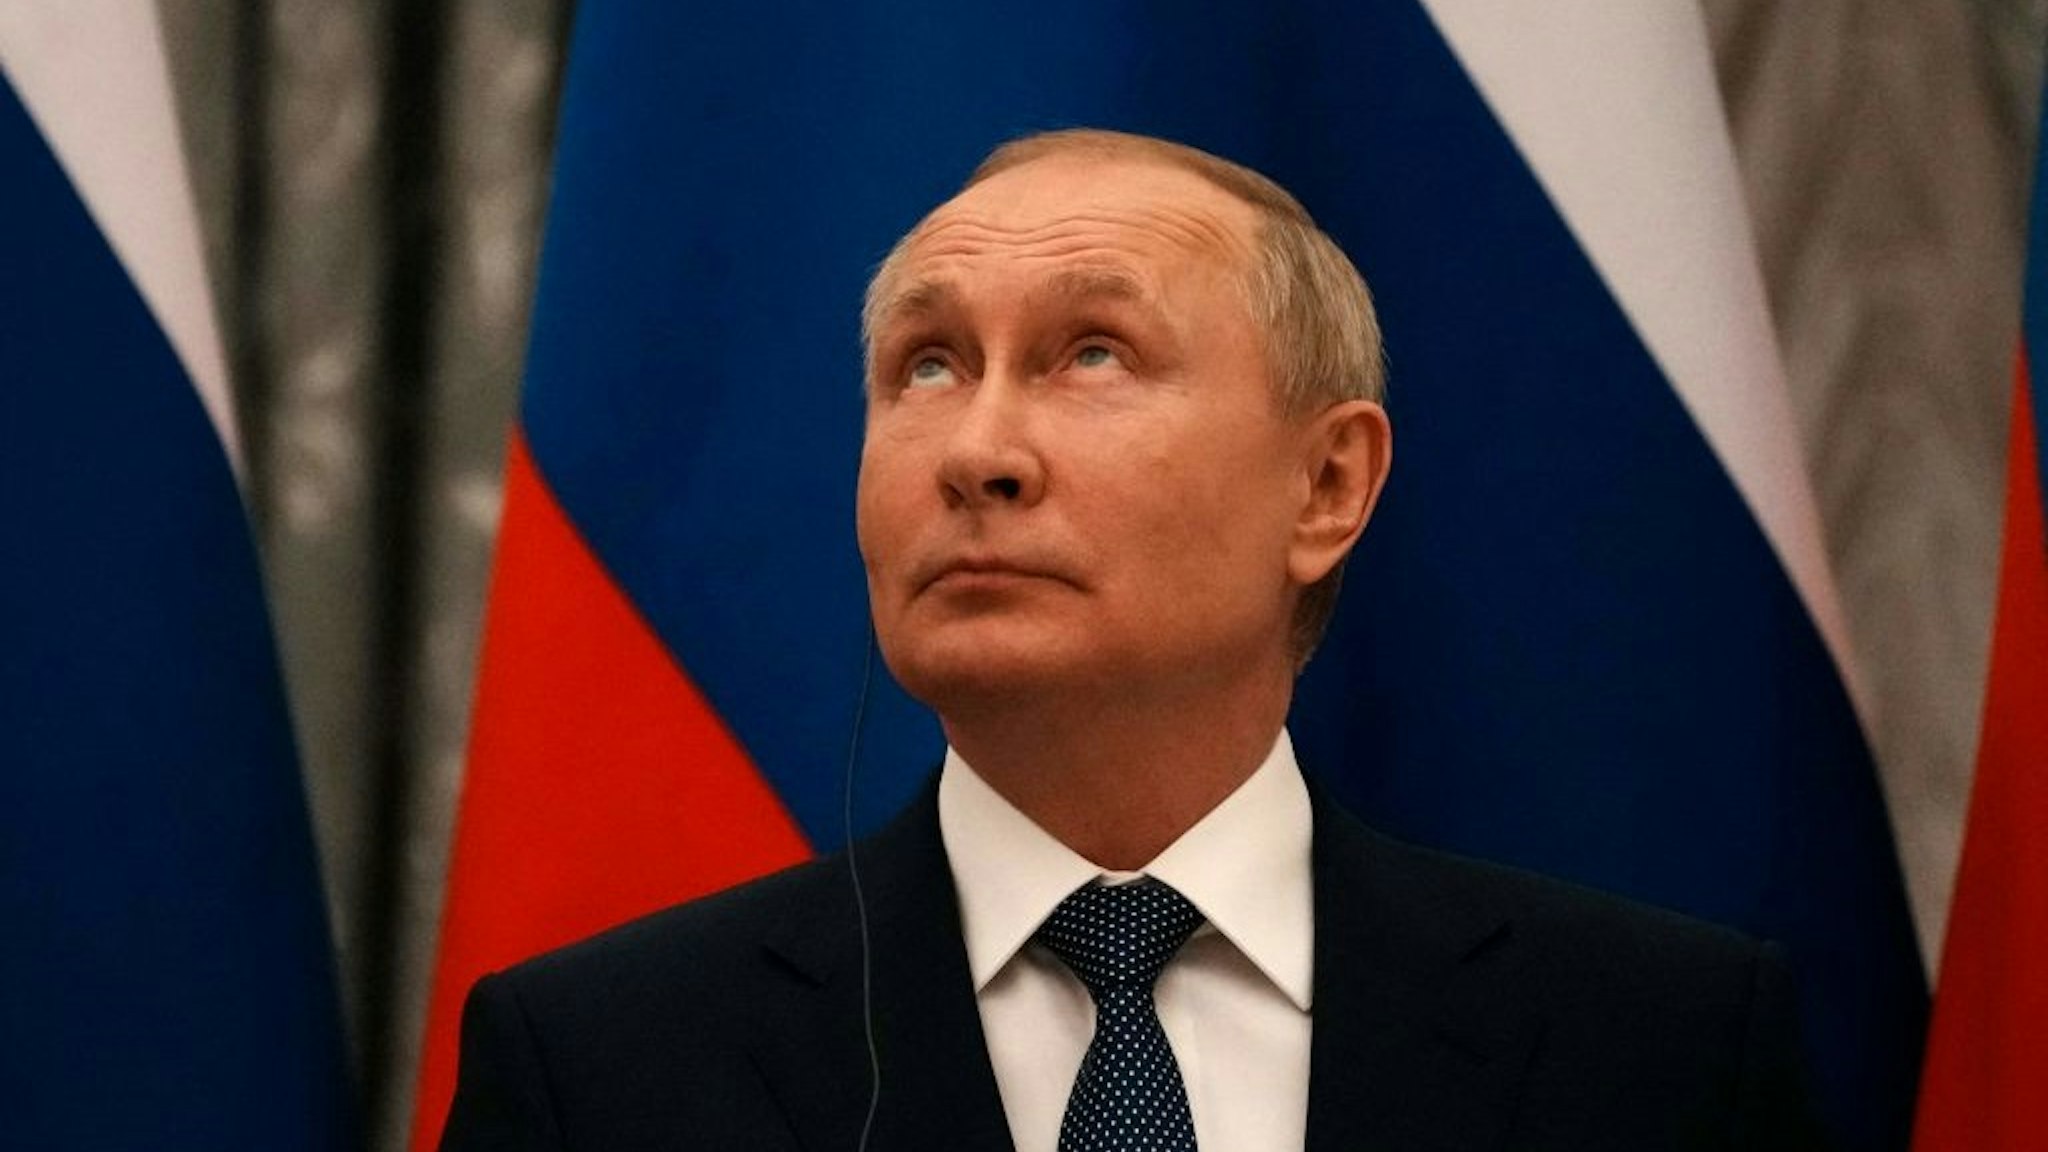 Russian President Vladimir Putin looks on during a press conference after meeting with French President in Moscow, on February 7, 2022.